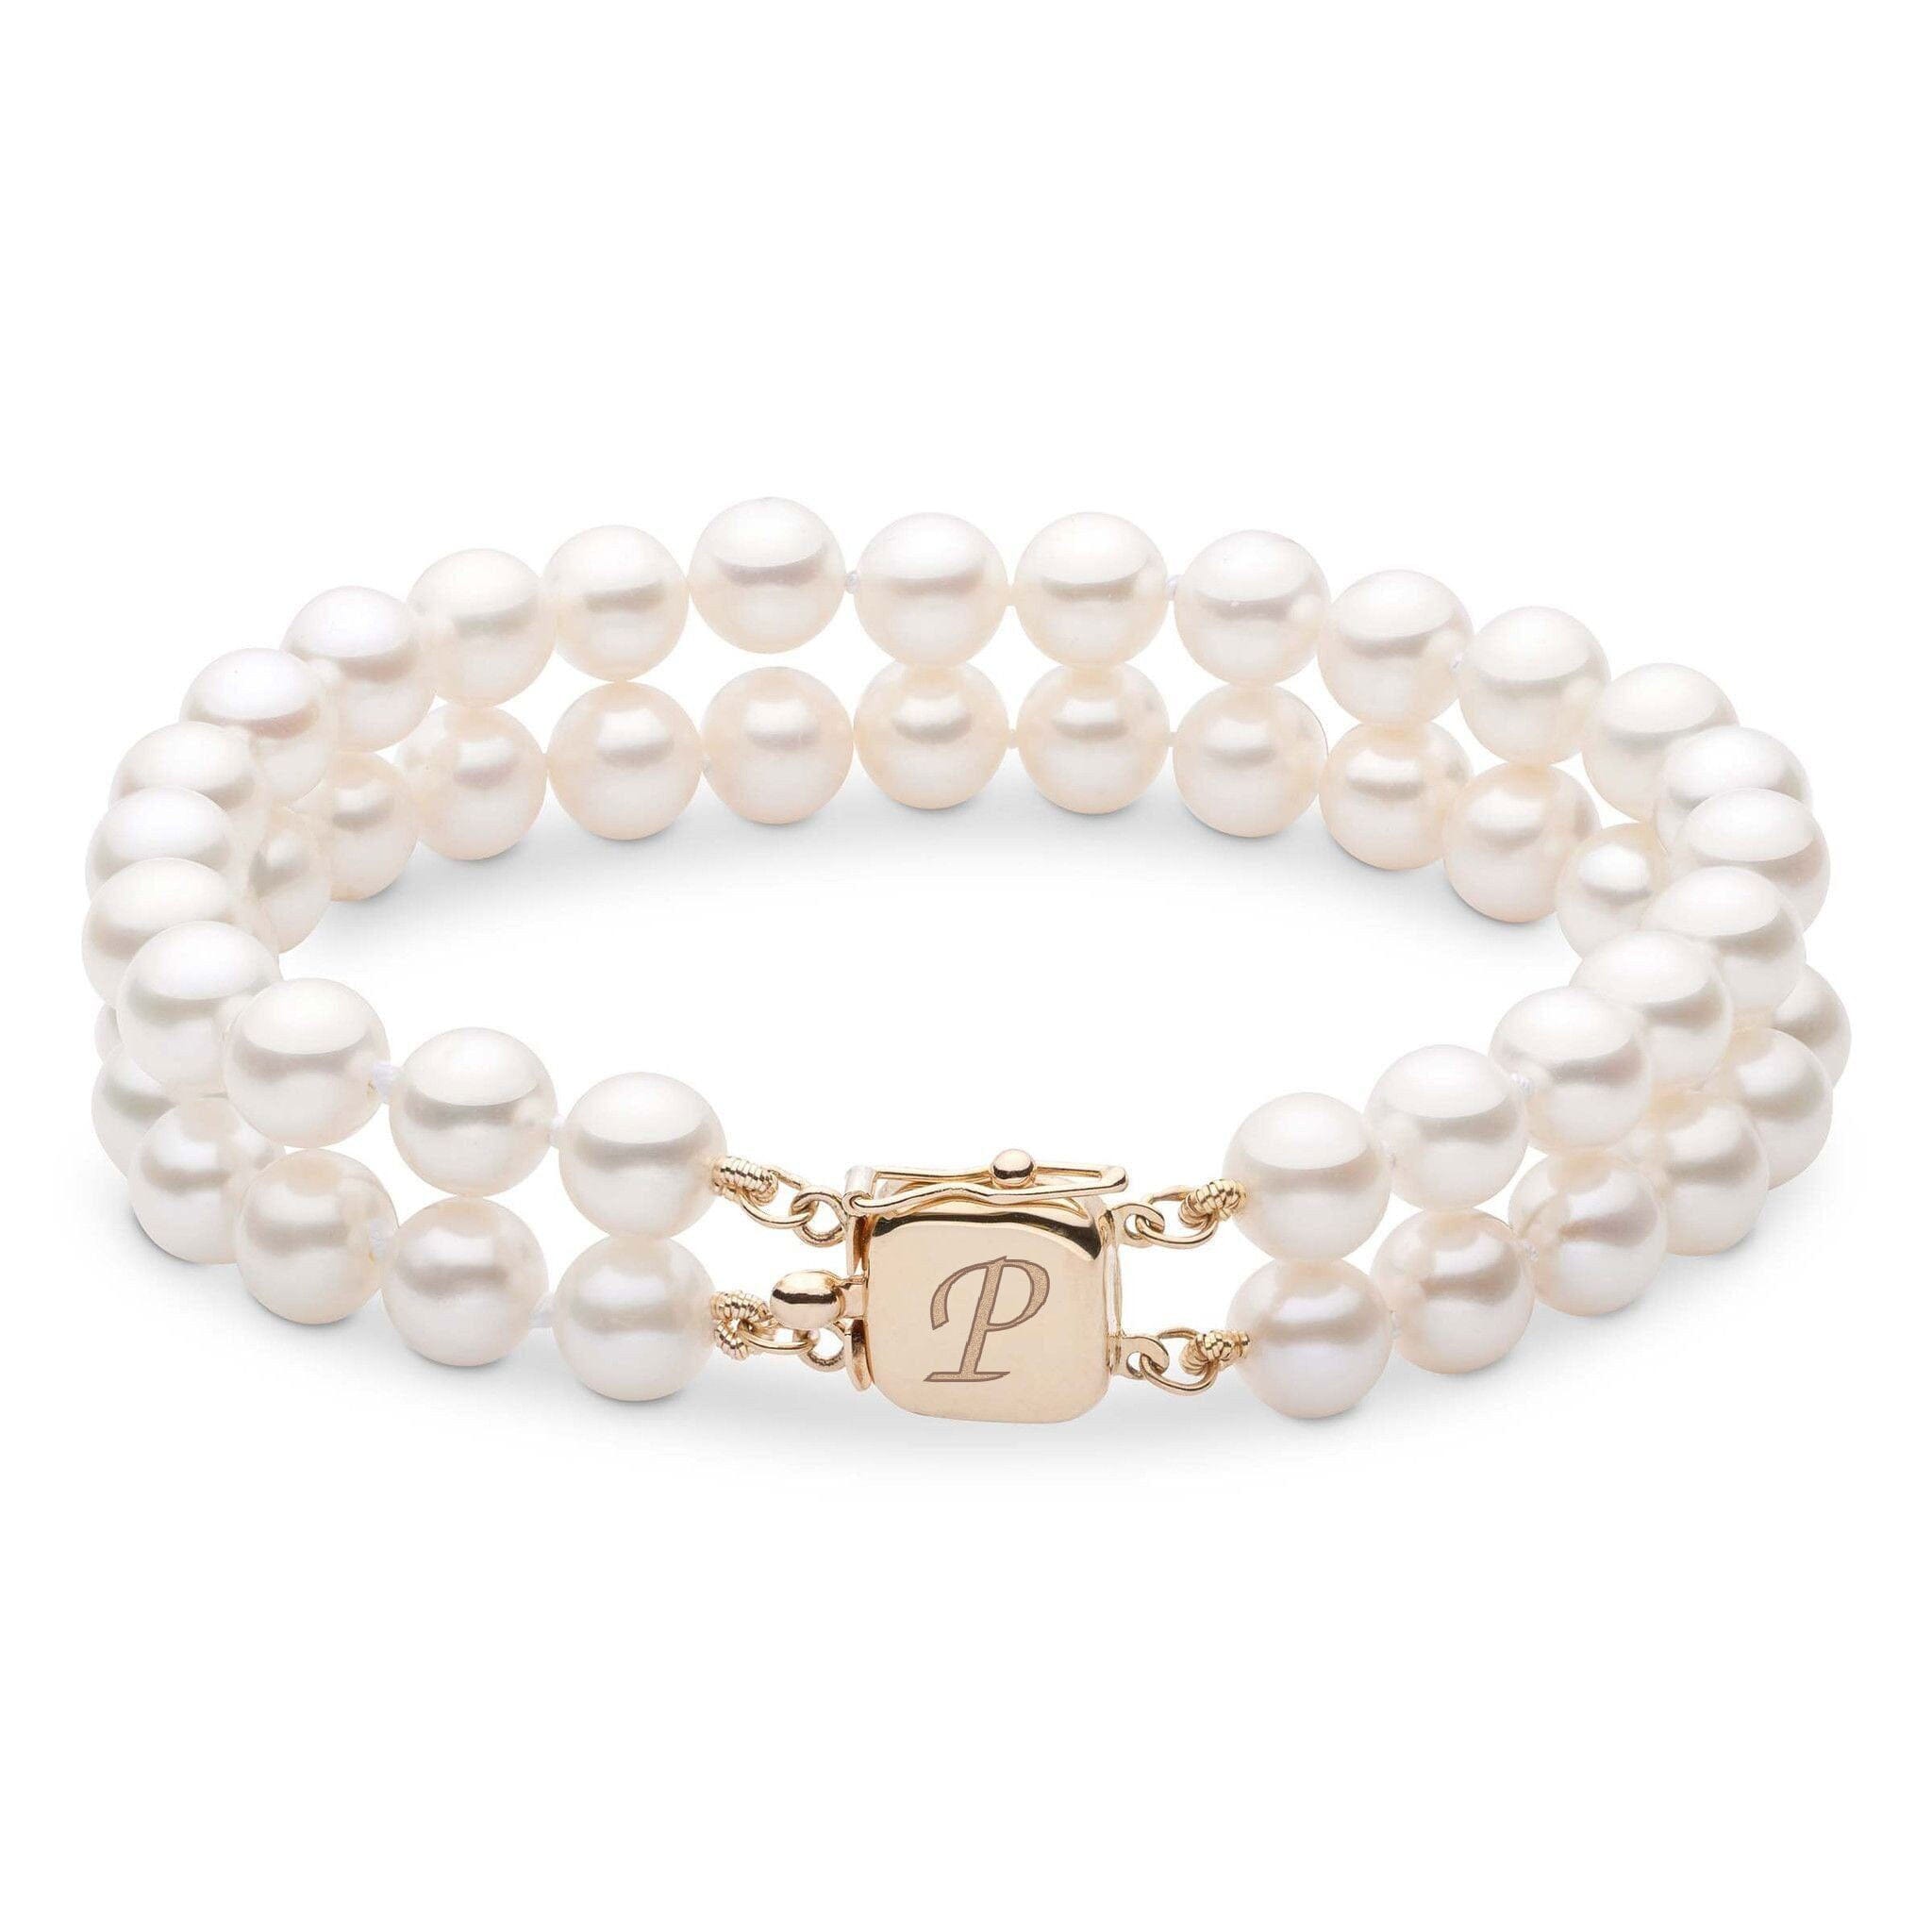 Personalized 7.5-8.0 mm AAA White Freshwater Pearl Double Strand Square Clasp Bracelet